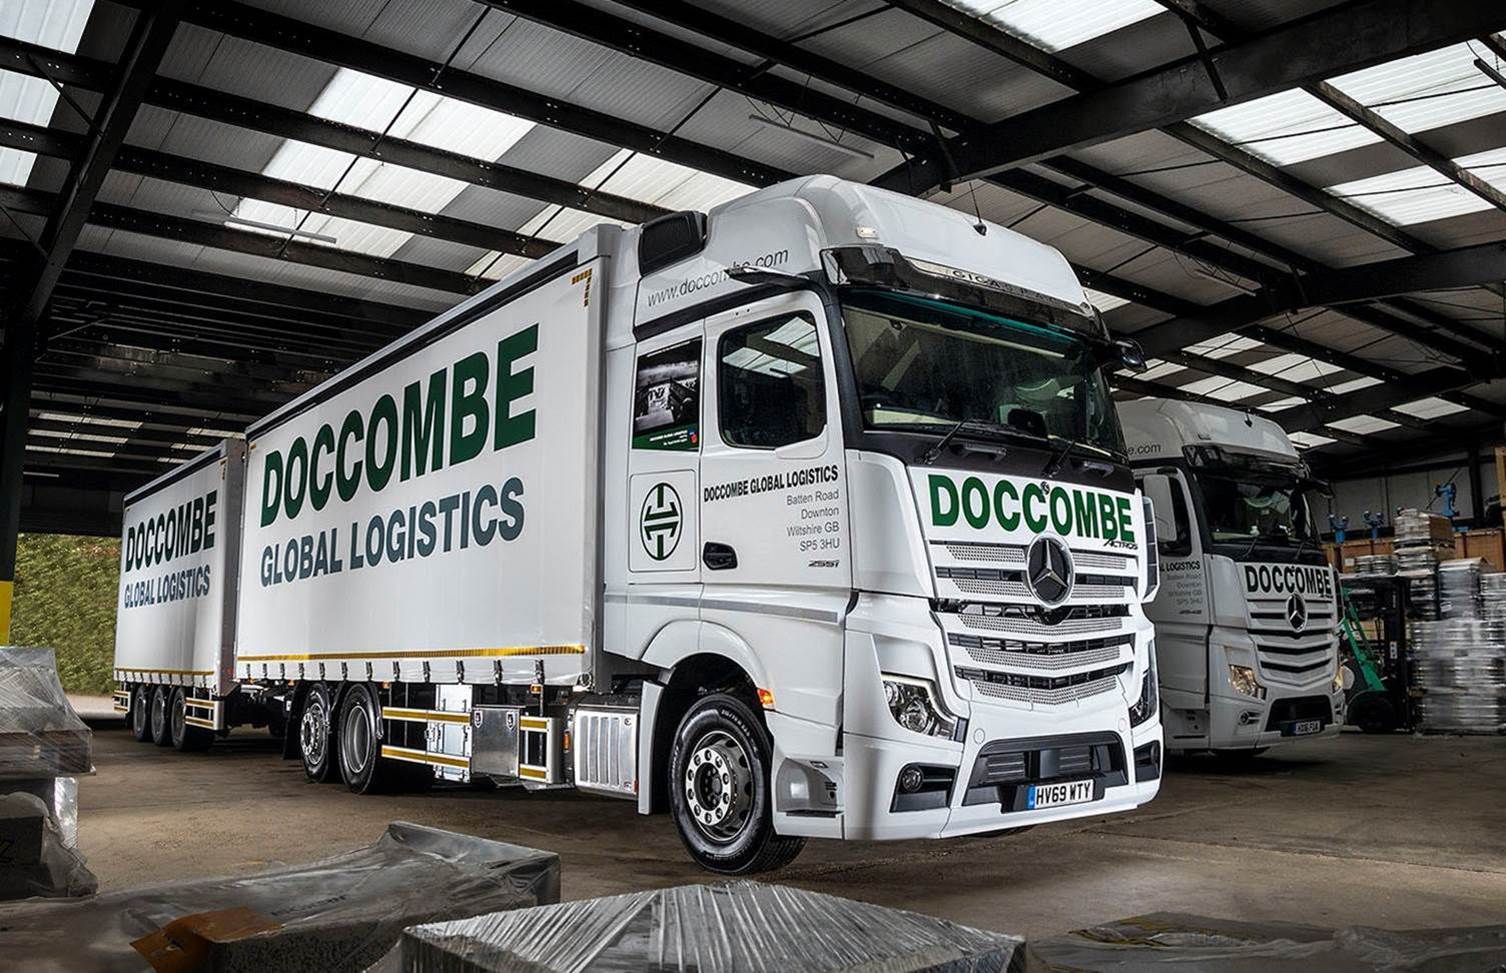 Doccombe Global Logistics new Mercedes-Benz Actros delivers a tribute to the D-Day fallen